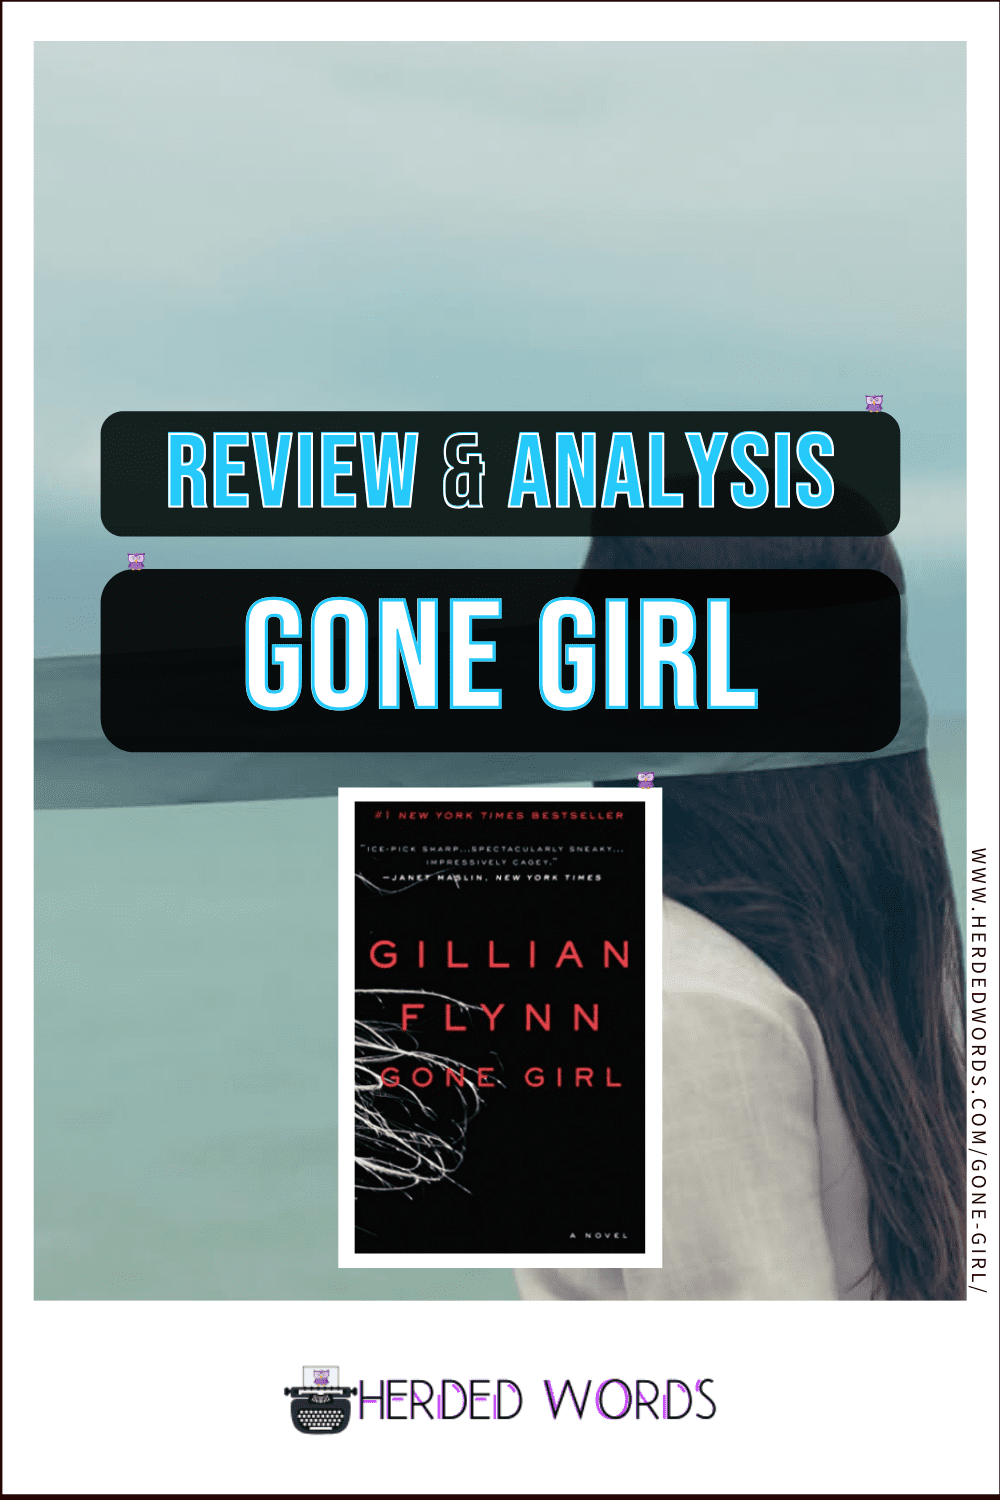 Image Link to Gone Girl Review & Analysis